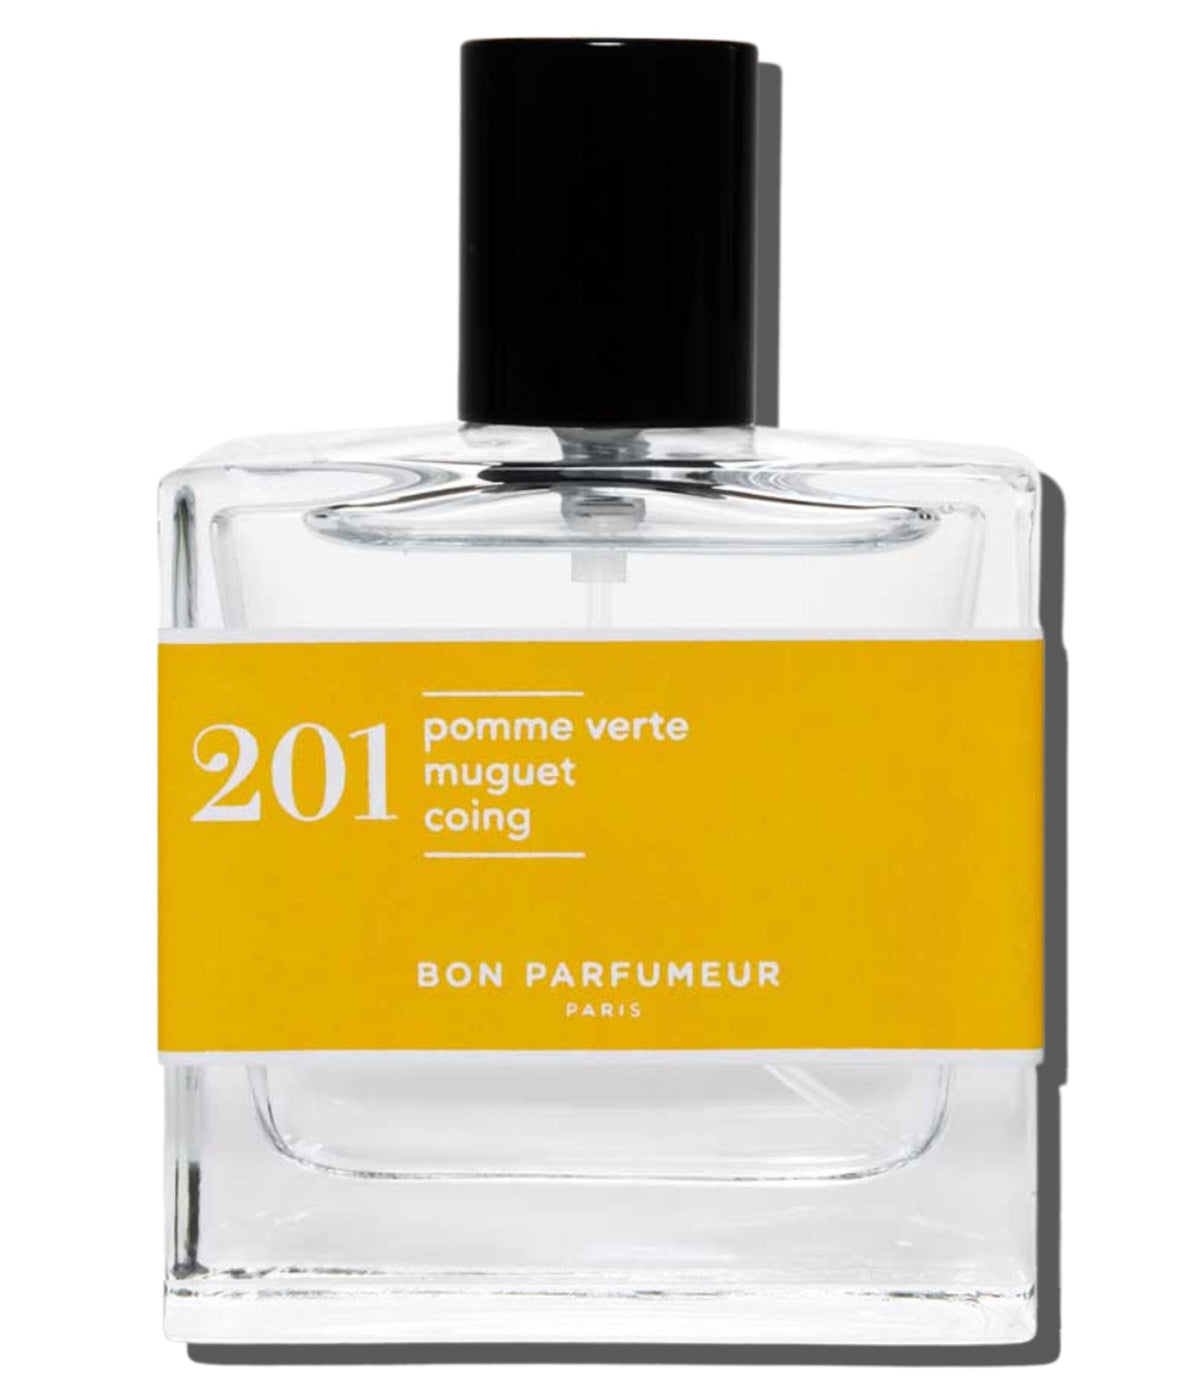 Eau de Parfum 201 Fruity: Green Apple, Lily Of The Valley and Quince 30ml